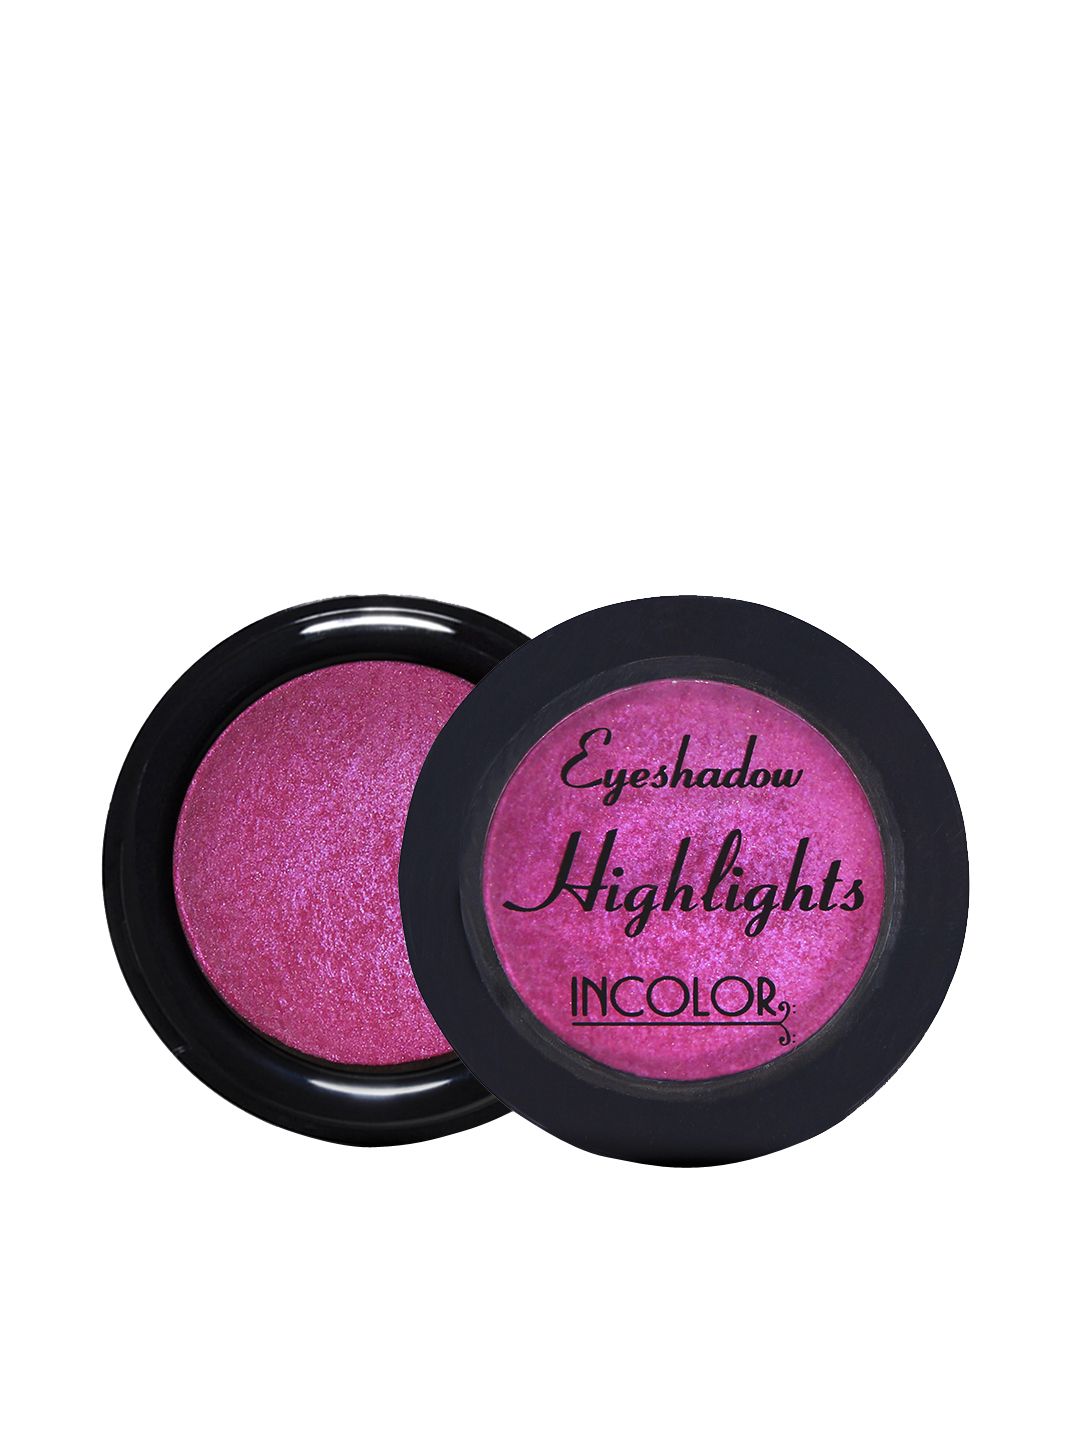 INCOLOR Highlighter Eye Shadow 28 Price in India